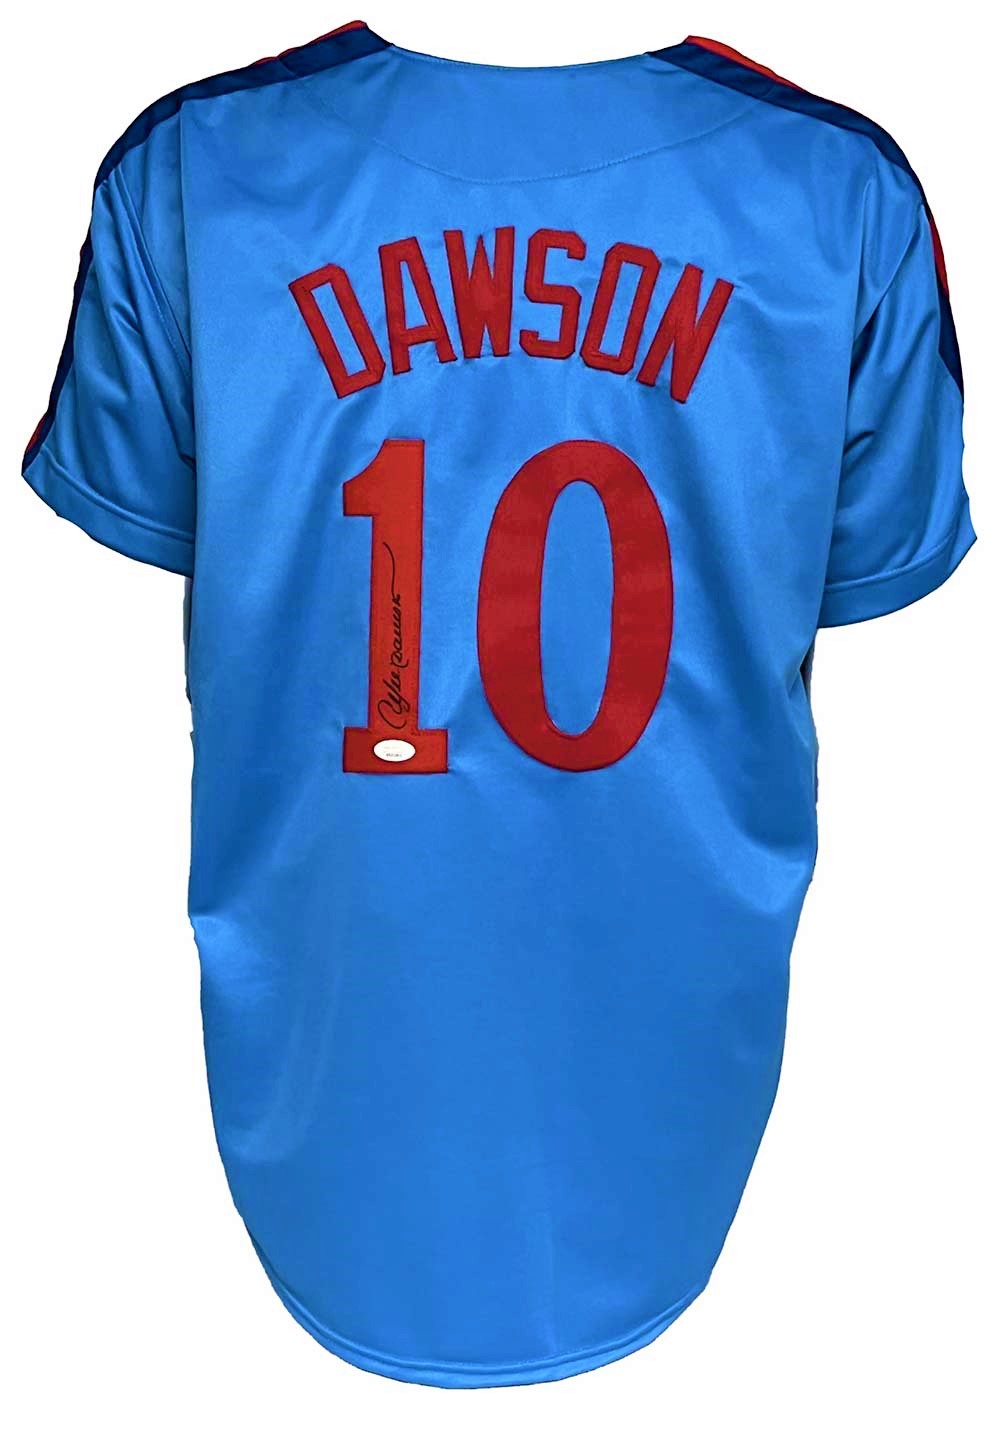 Andre Dawson Montreal Expos Jersey